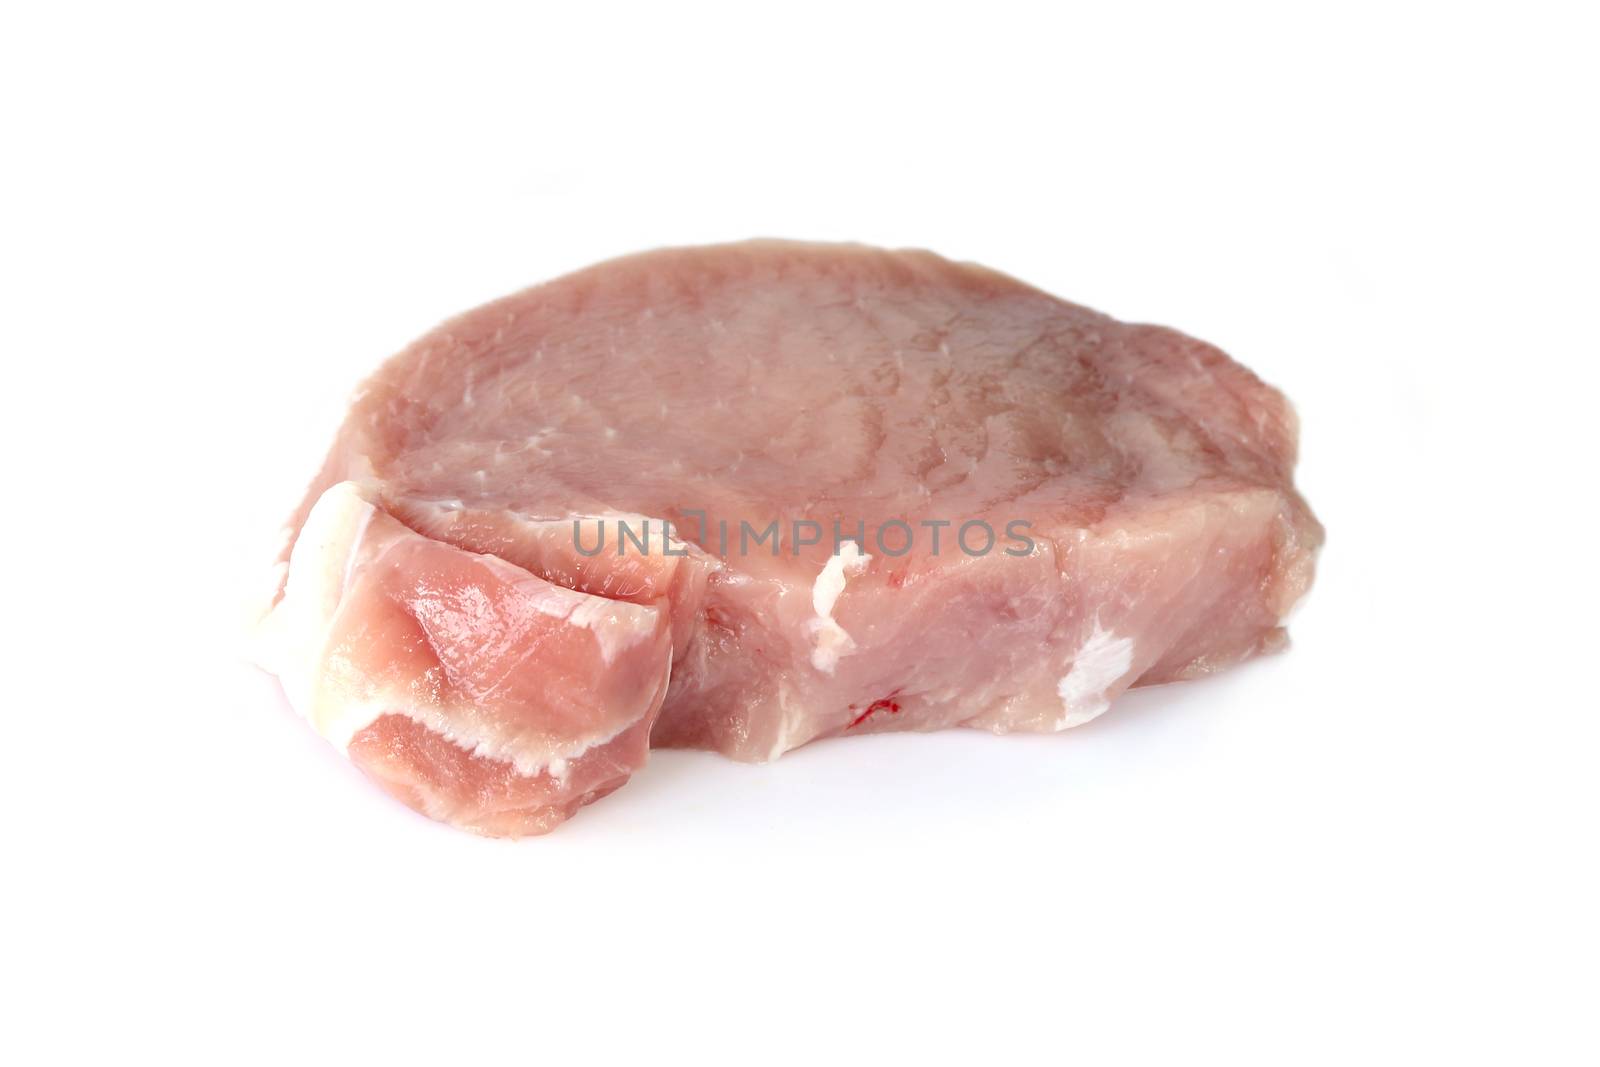 Image of raw meat pork on a white background